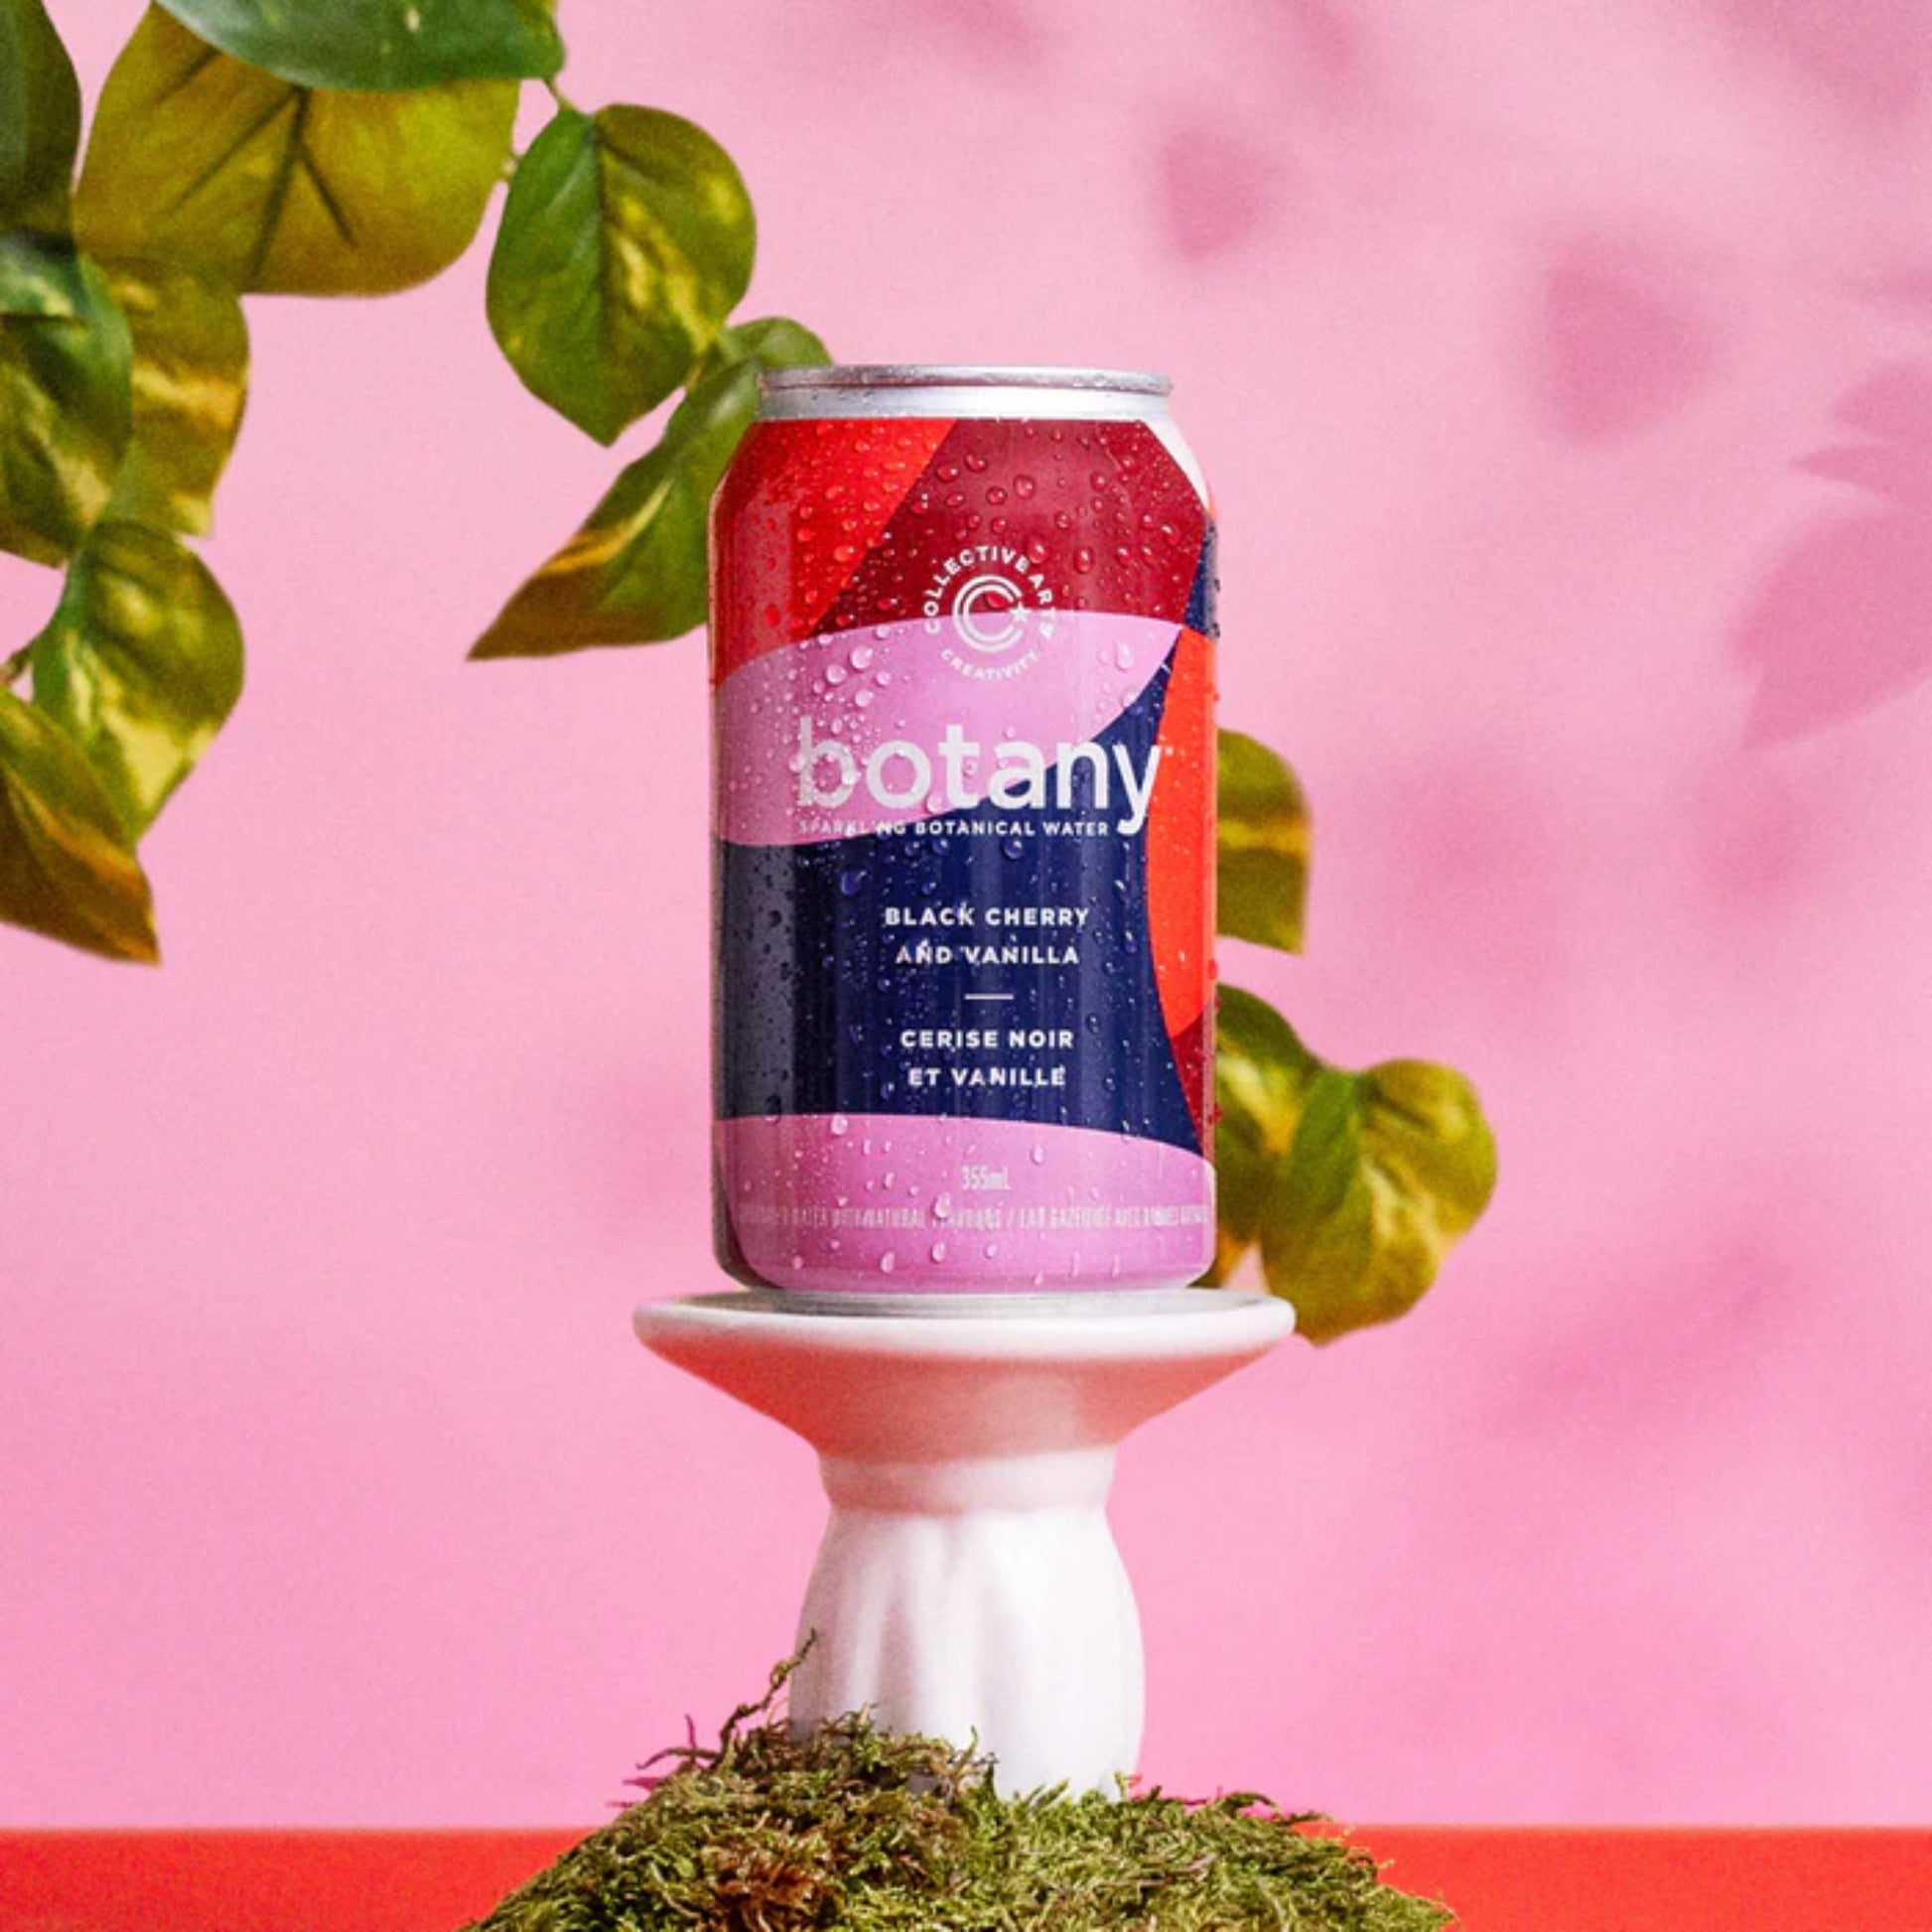 Collective Arts Botany Black Cherry and Vanilla Sparkling Botanical Water is available at Knyota Drinks in Ottawa.